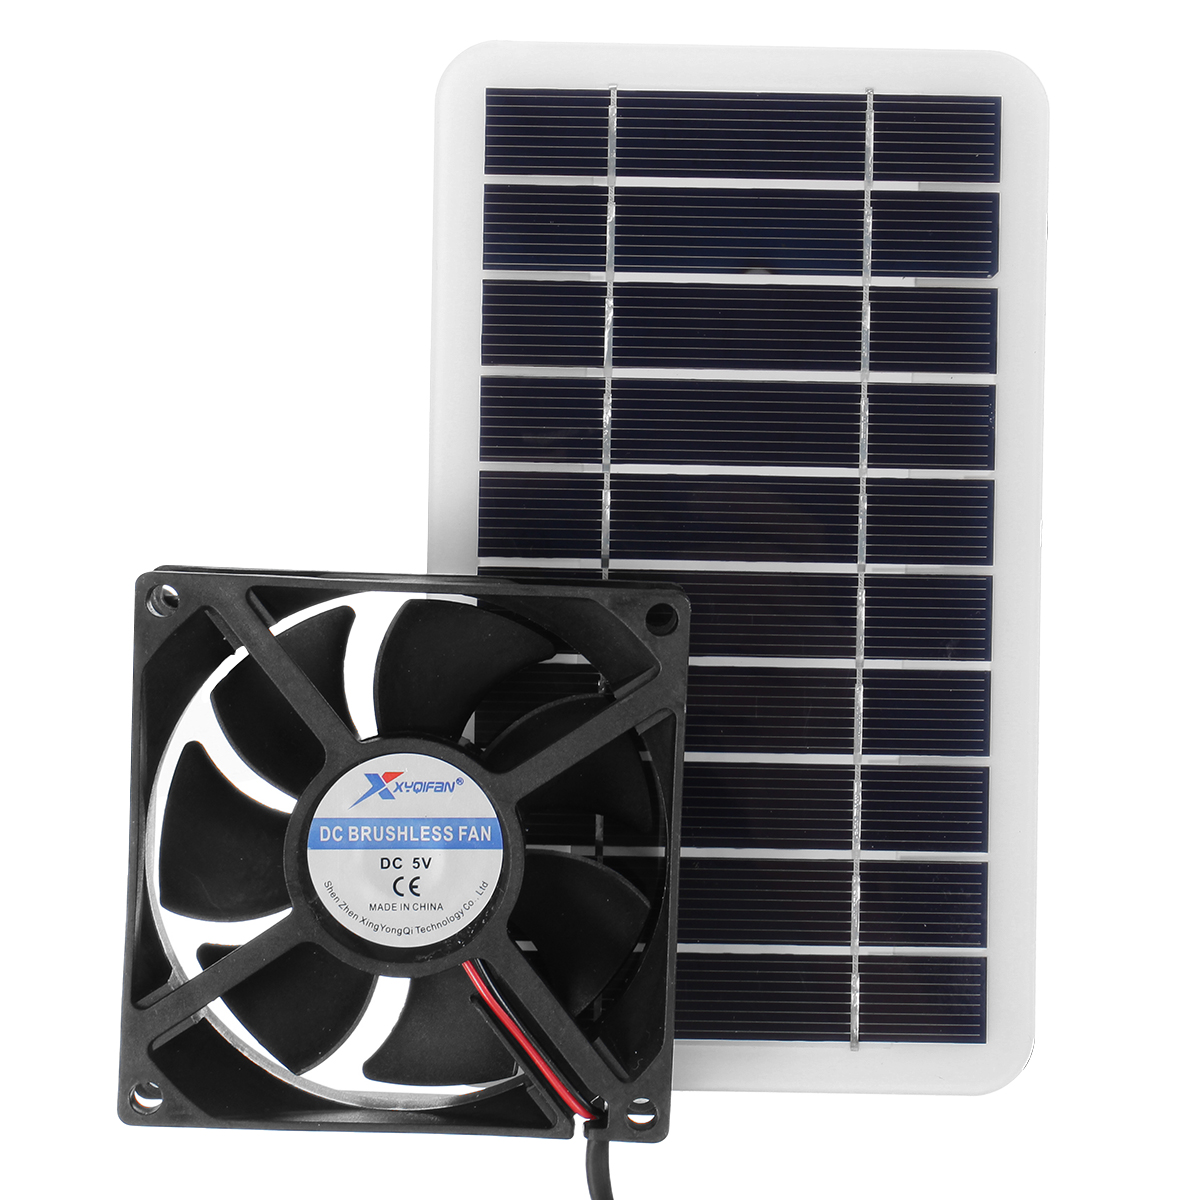 100W-Portable-Solar-Panel-Kit-Dual-DC-5V-USB-Charger-Kit-Solar-Power-Controller-with-Fans-1905897-14